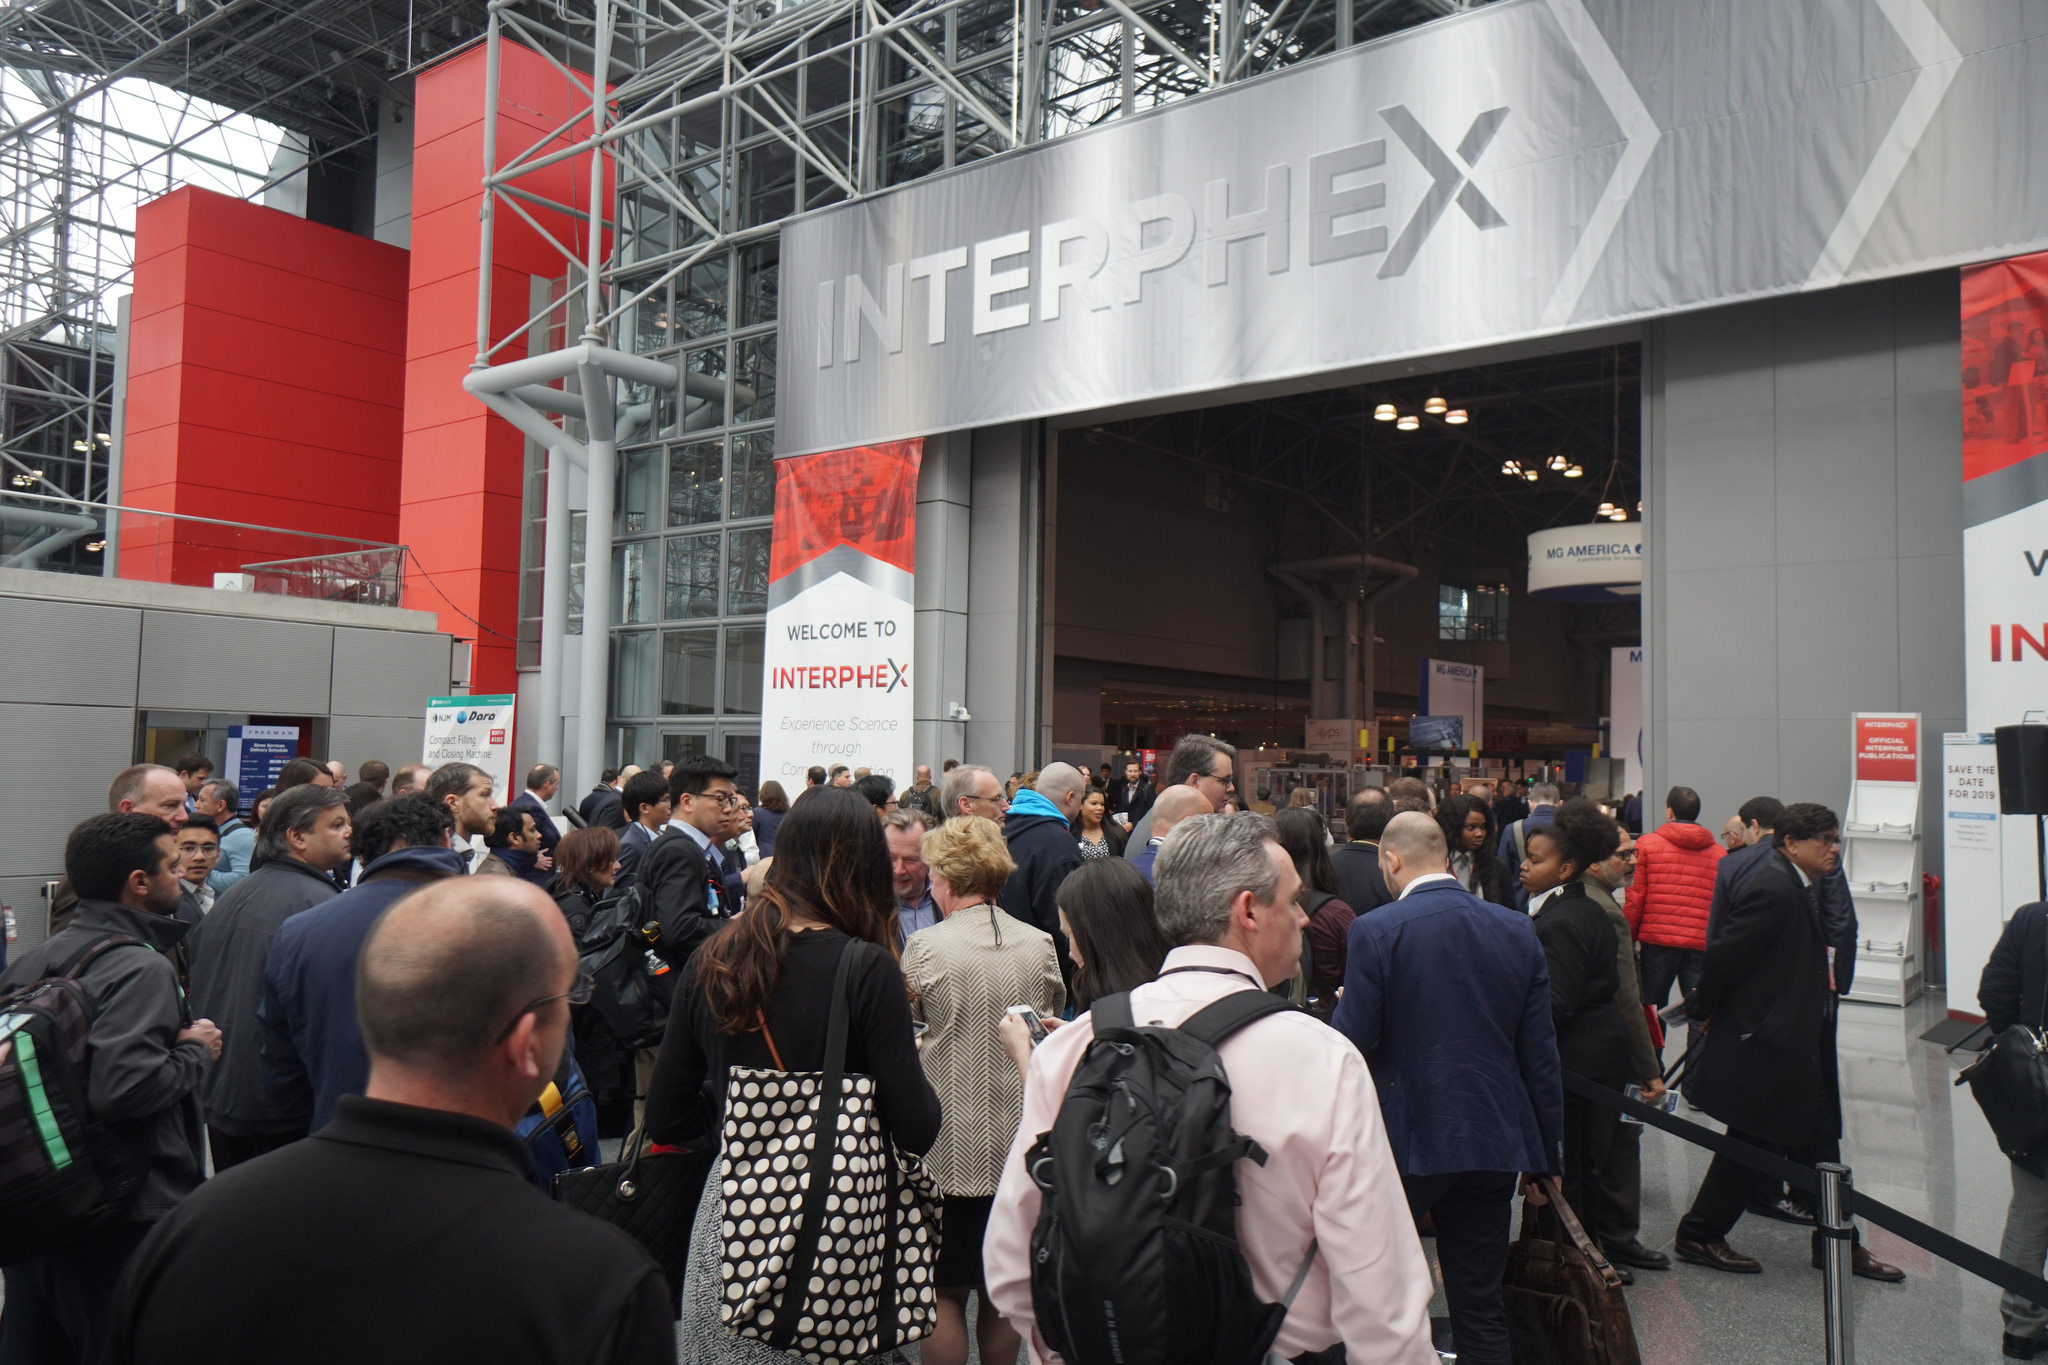 ITT is showcasing its products at this year's INTERPHEX